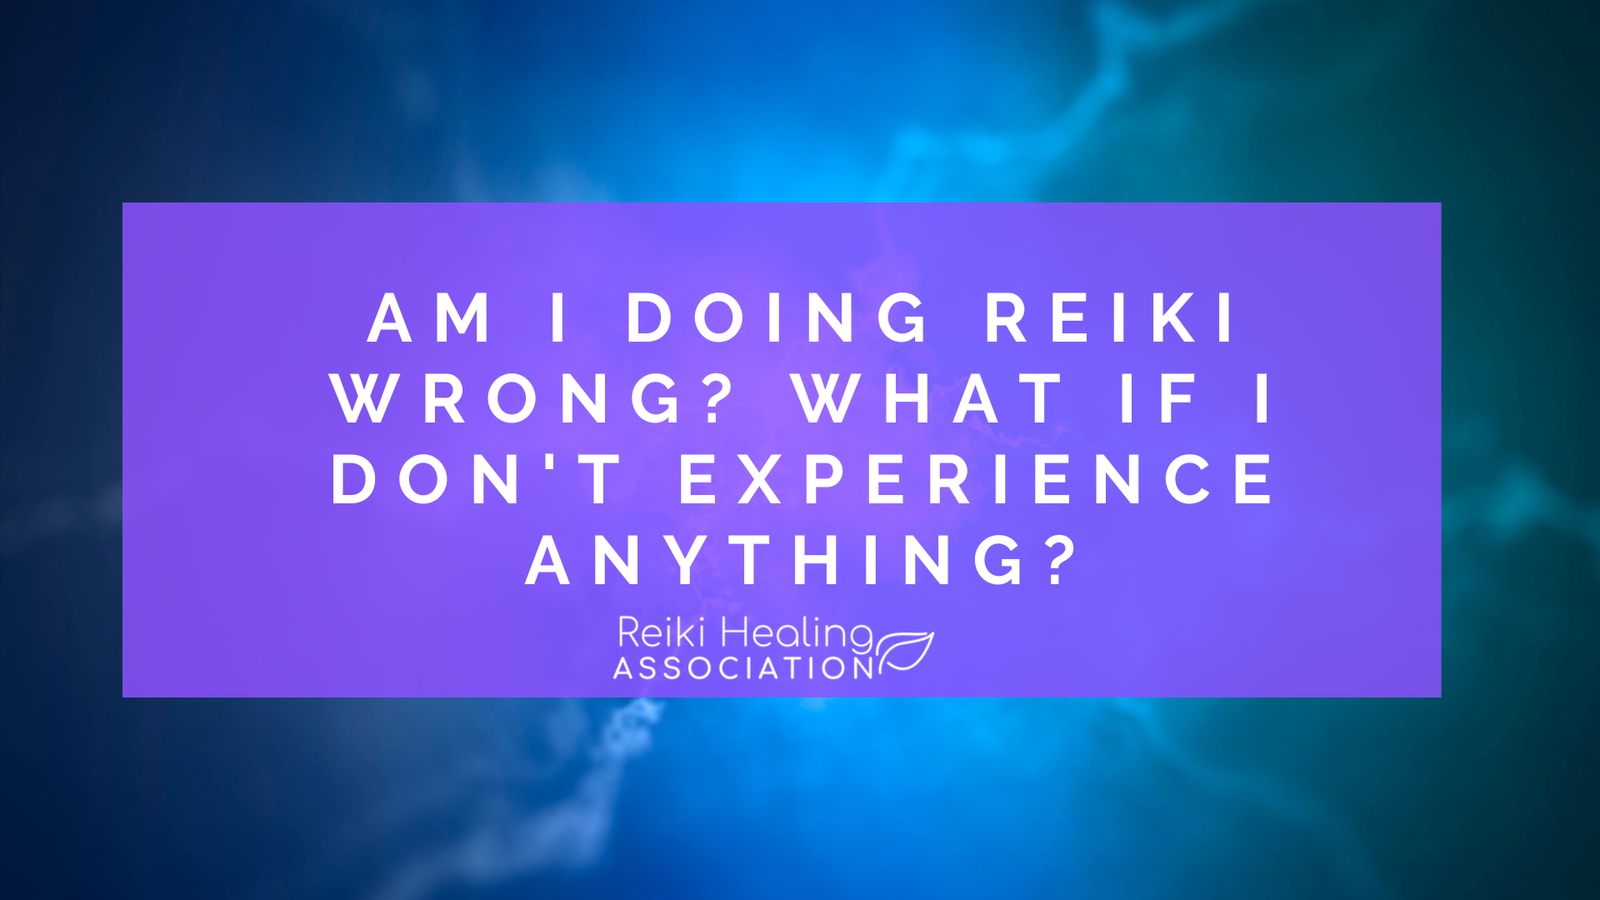 Am I Doing Reiki Wrong? What if I don't experience anything